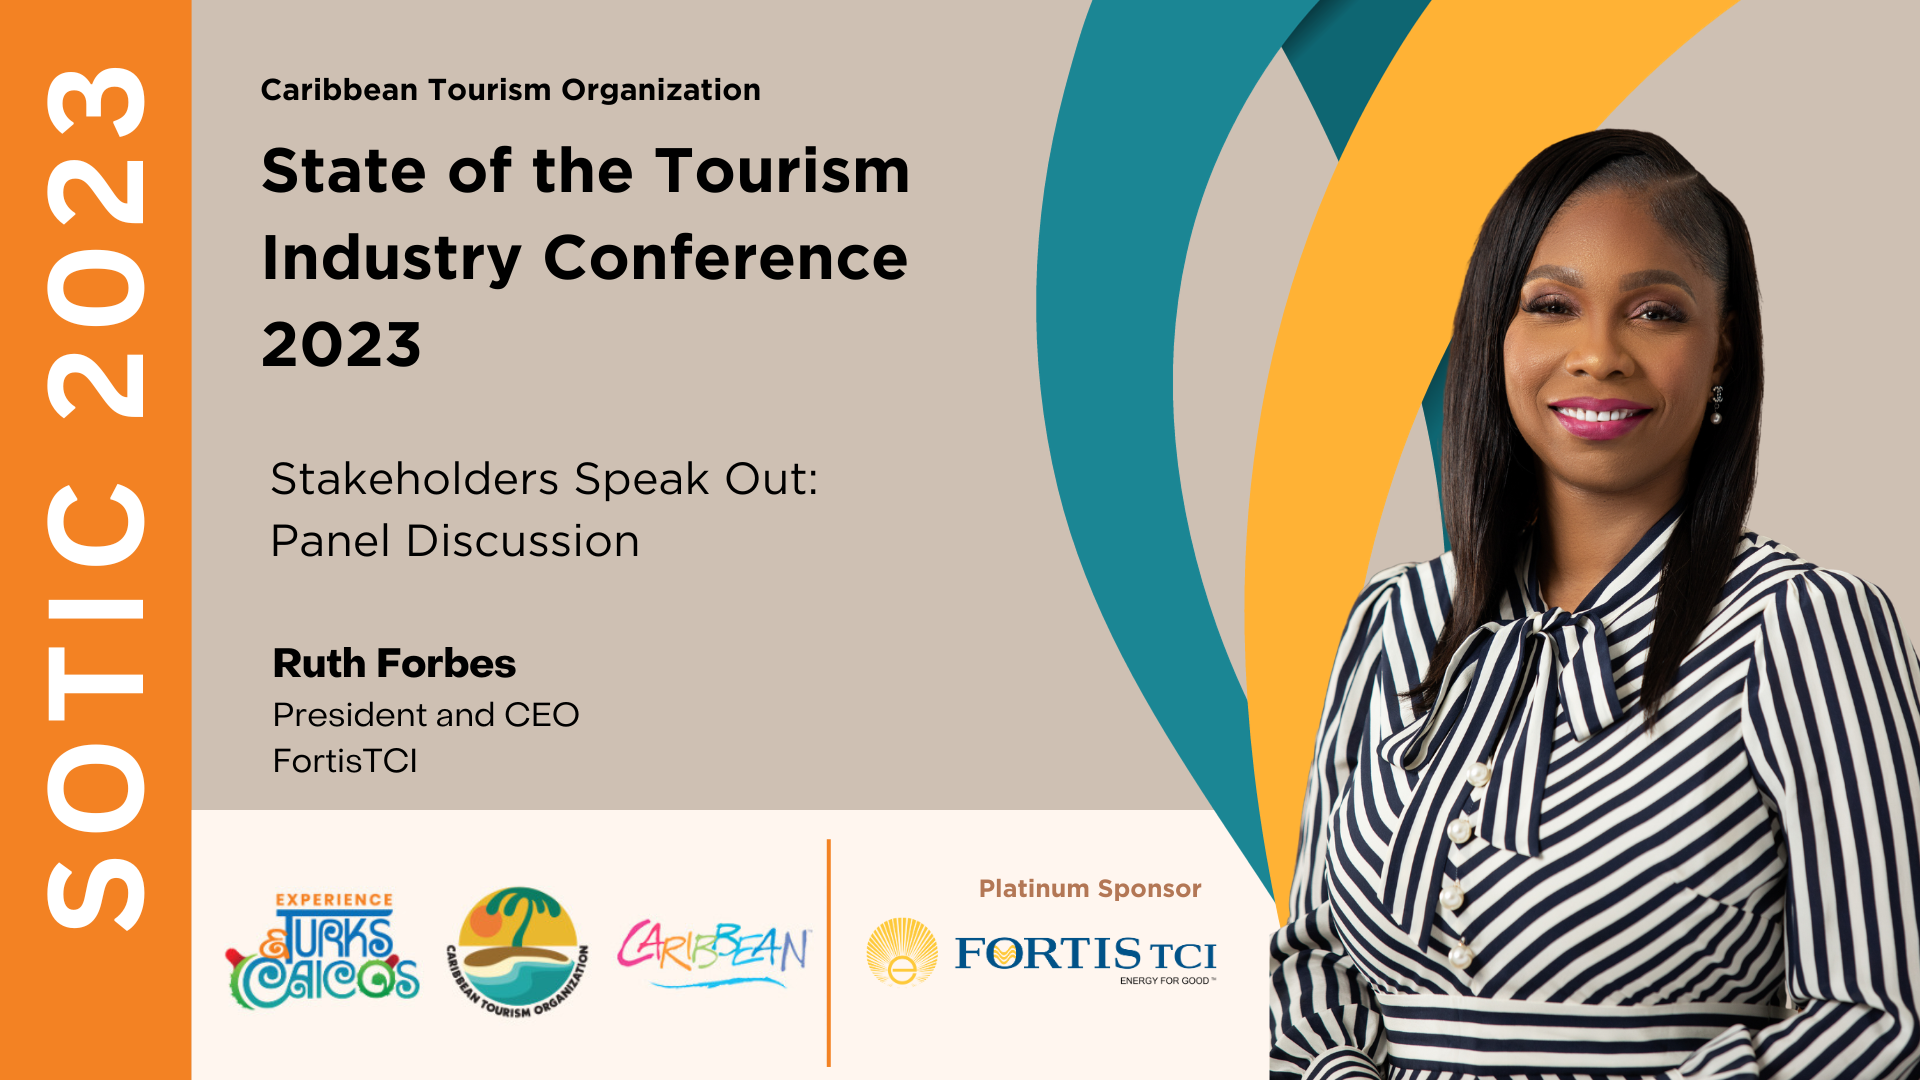 FortisTCI Partners with Ministry of Tourism as Platinum Sponsor of State of the Tourism Industry Conference